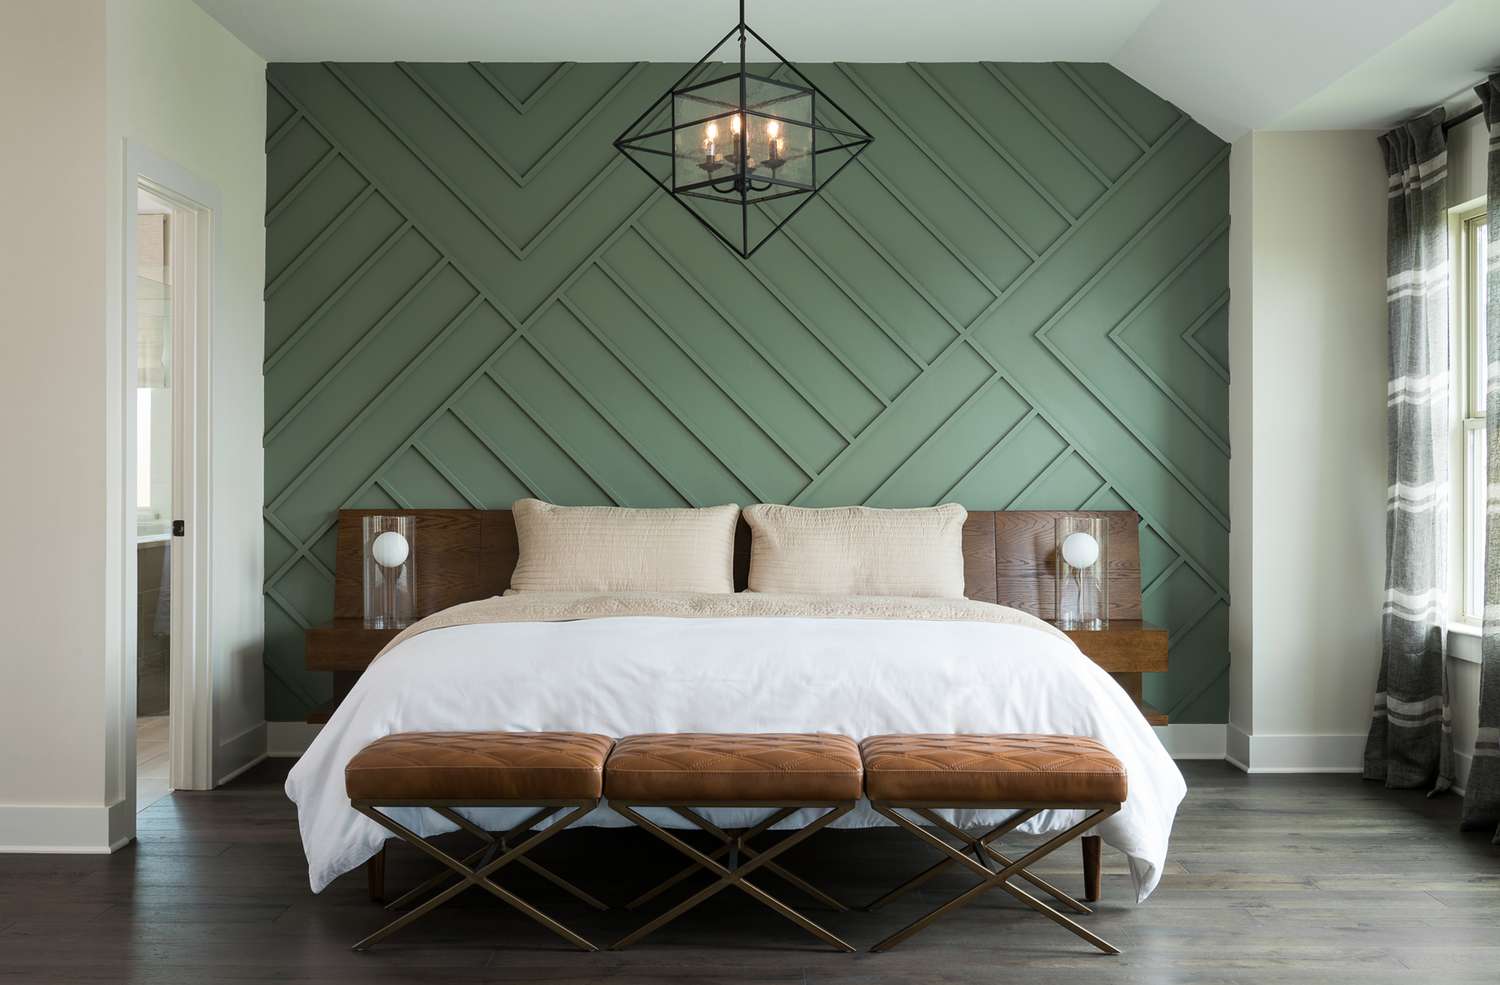 Board and batten interior ideas - green bedroom accent wall